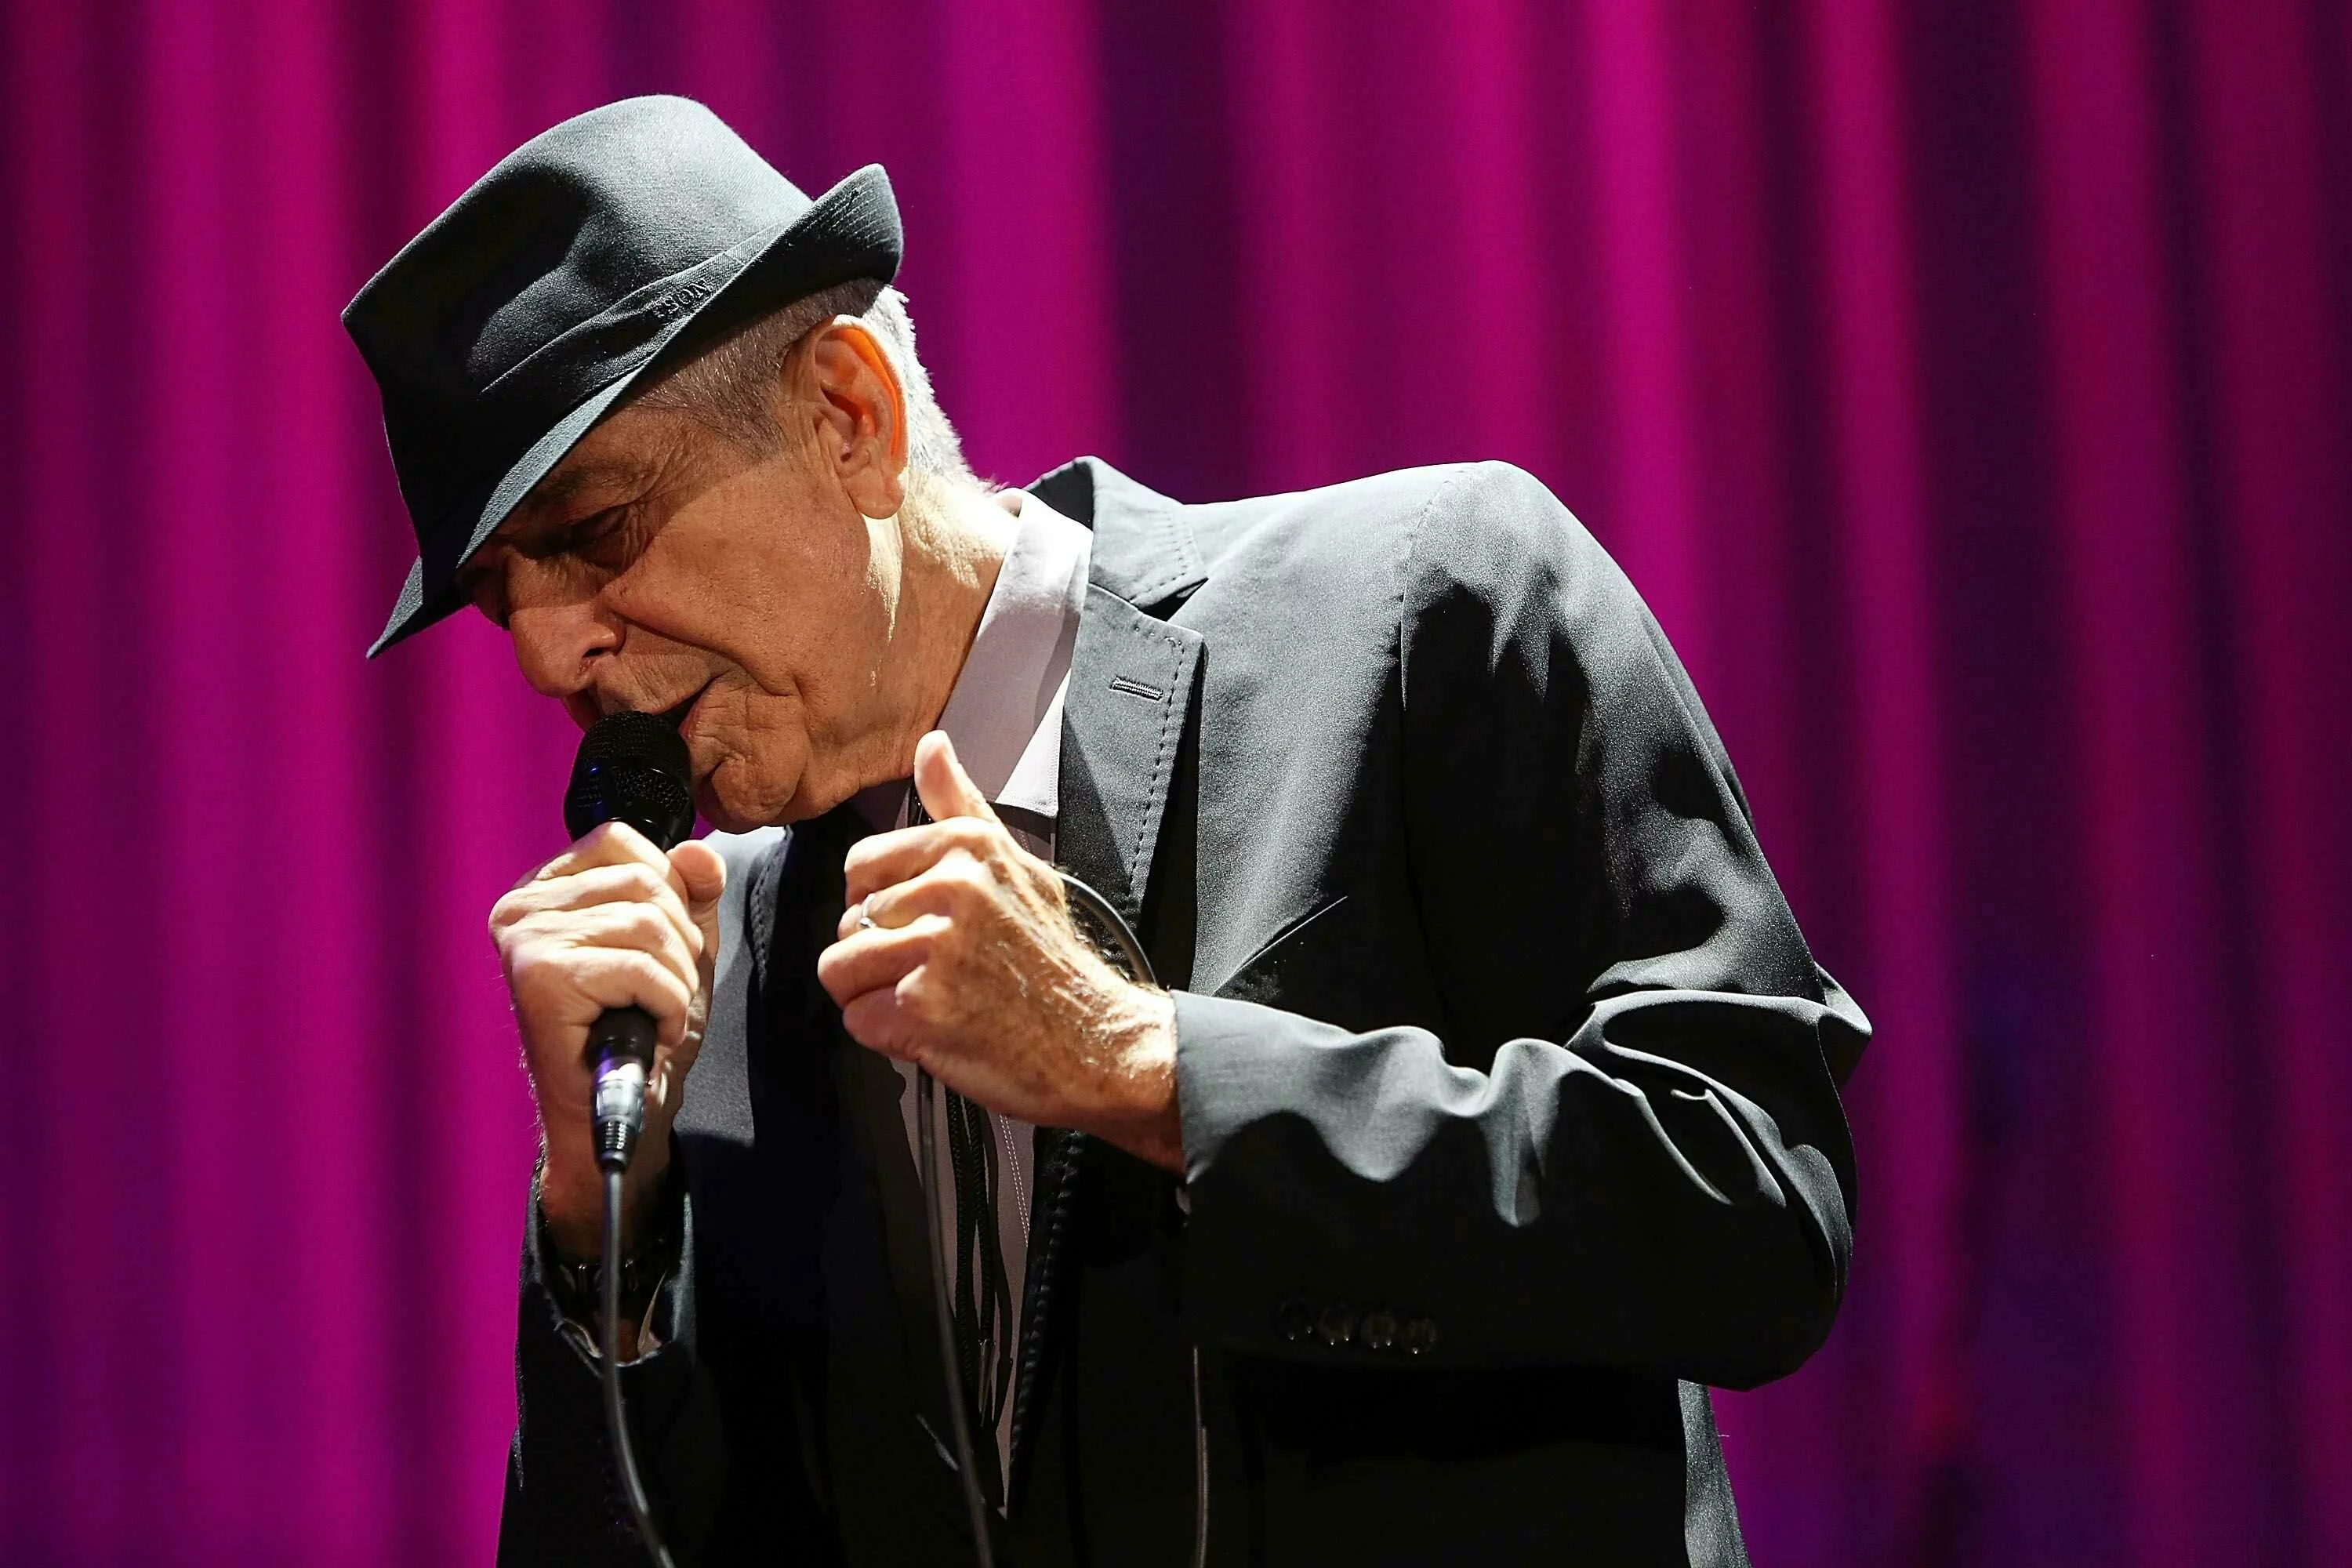 Leonard Cohen’s ‘The Hills’ Gets A Moving Music Video